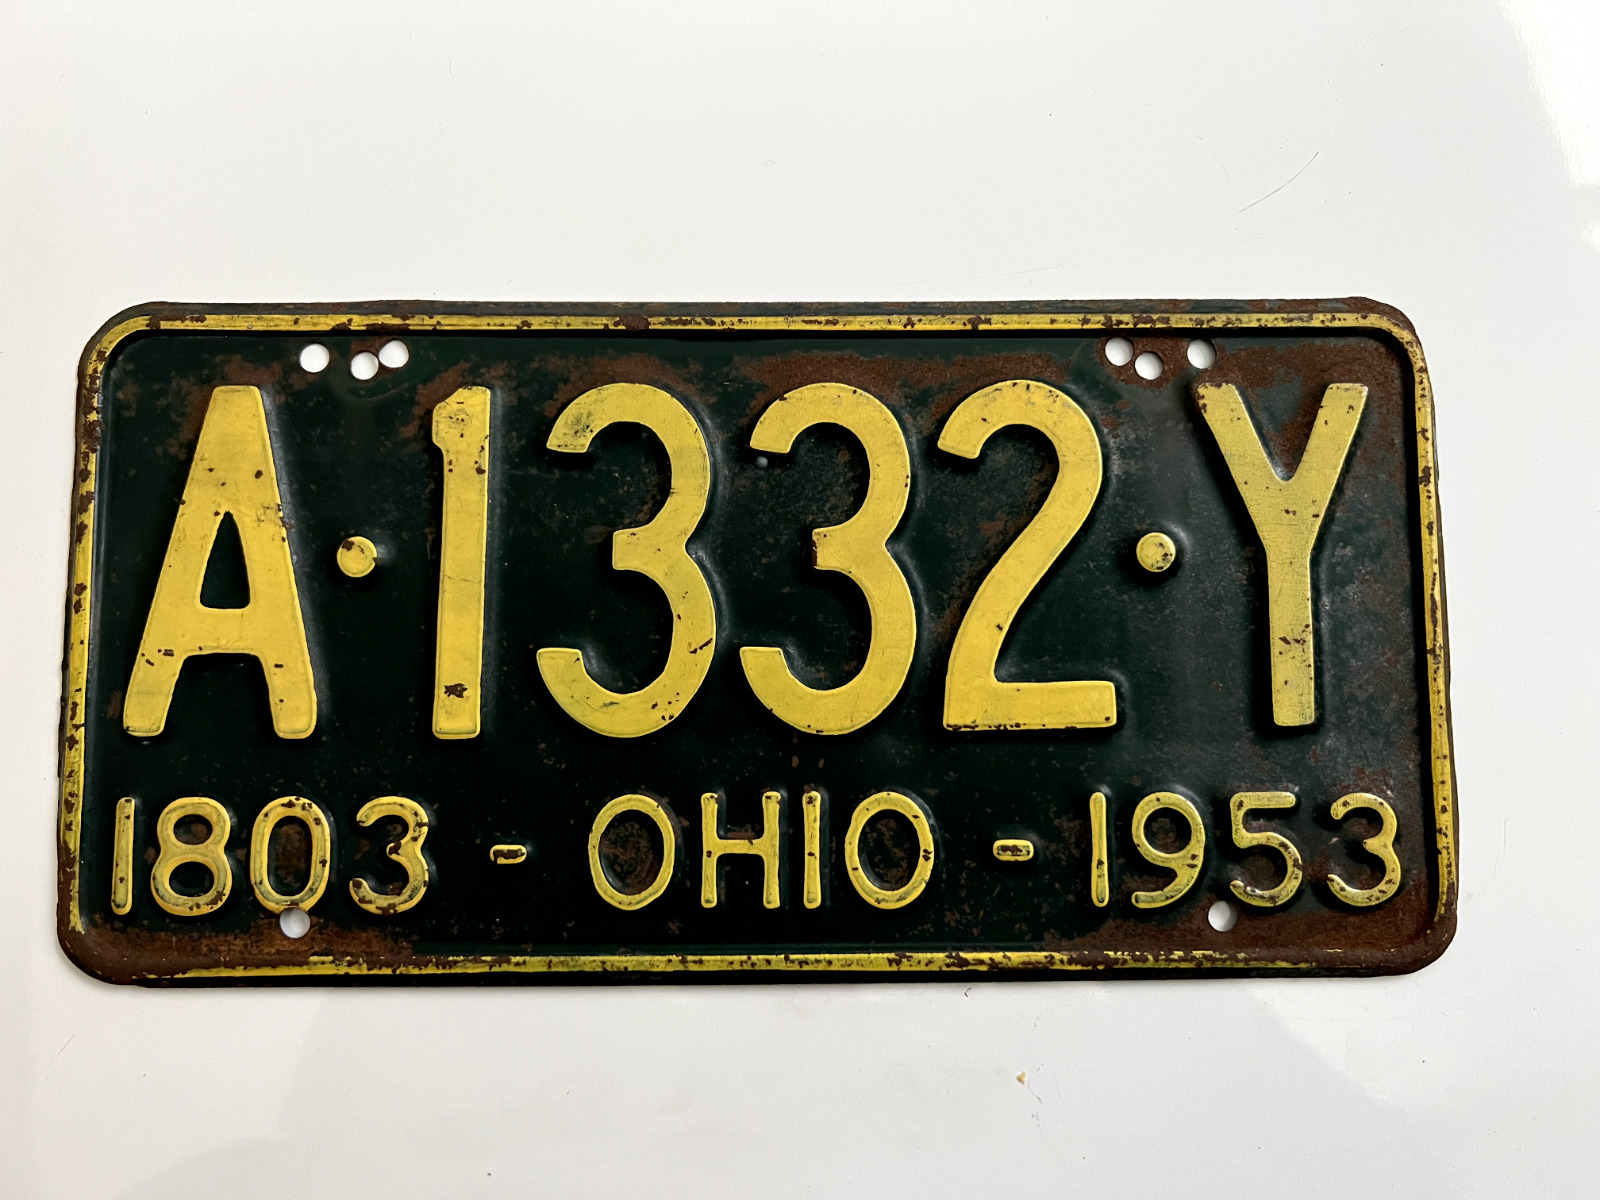 1953 OHIO License Plate # A 1332 Y